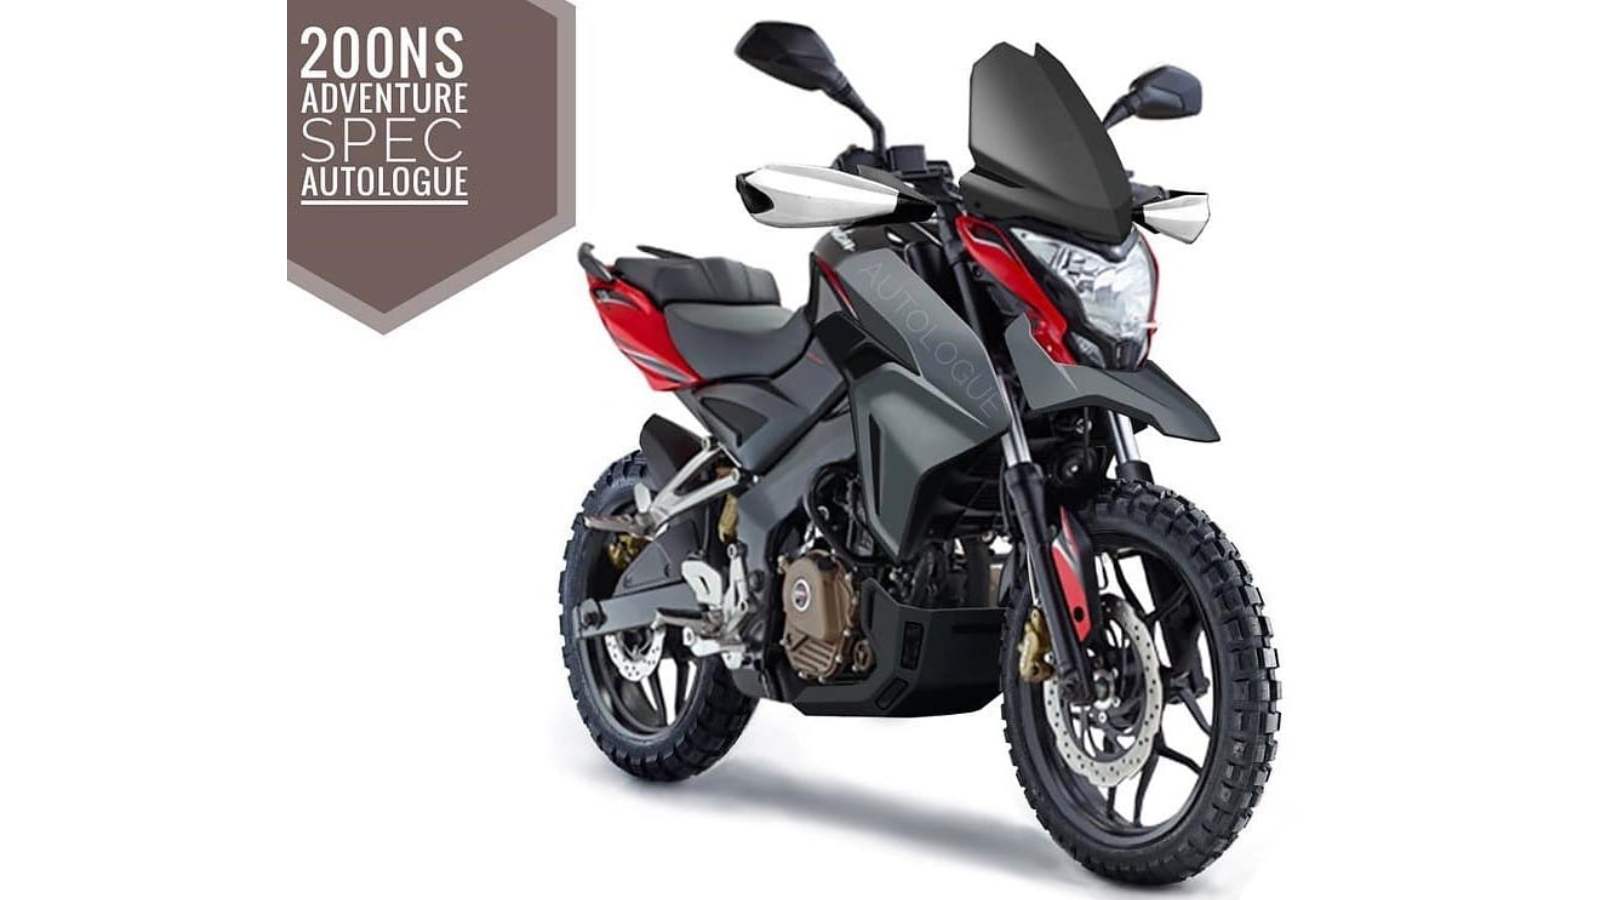 Pulsar Ns 200 New Model 2019 Price In India